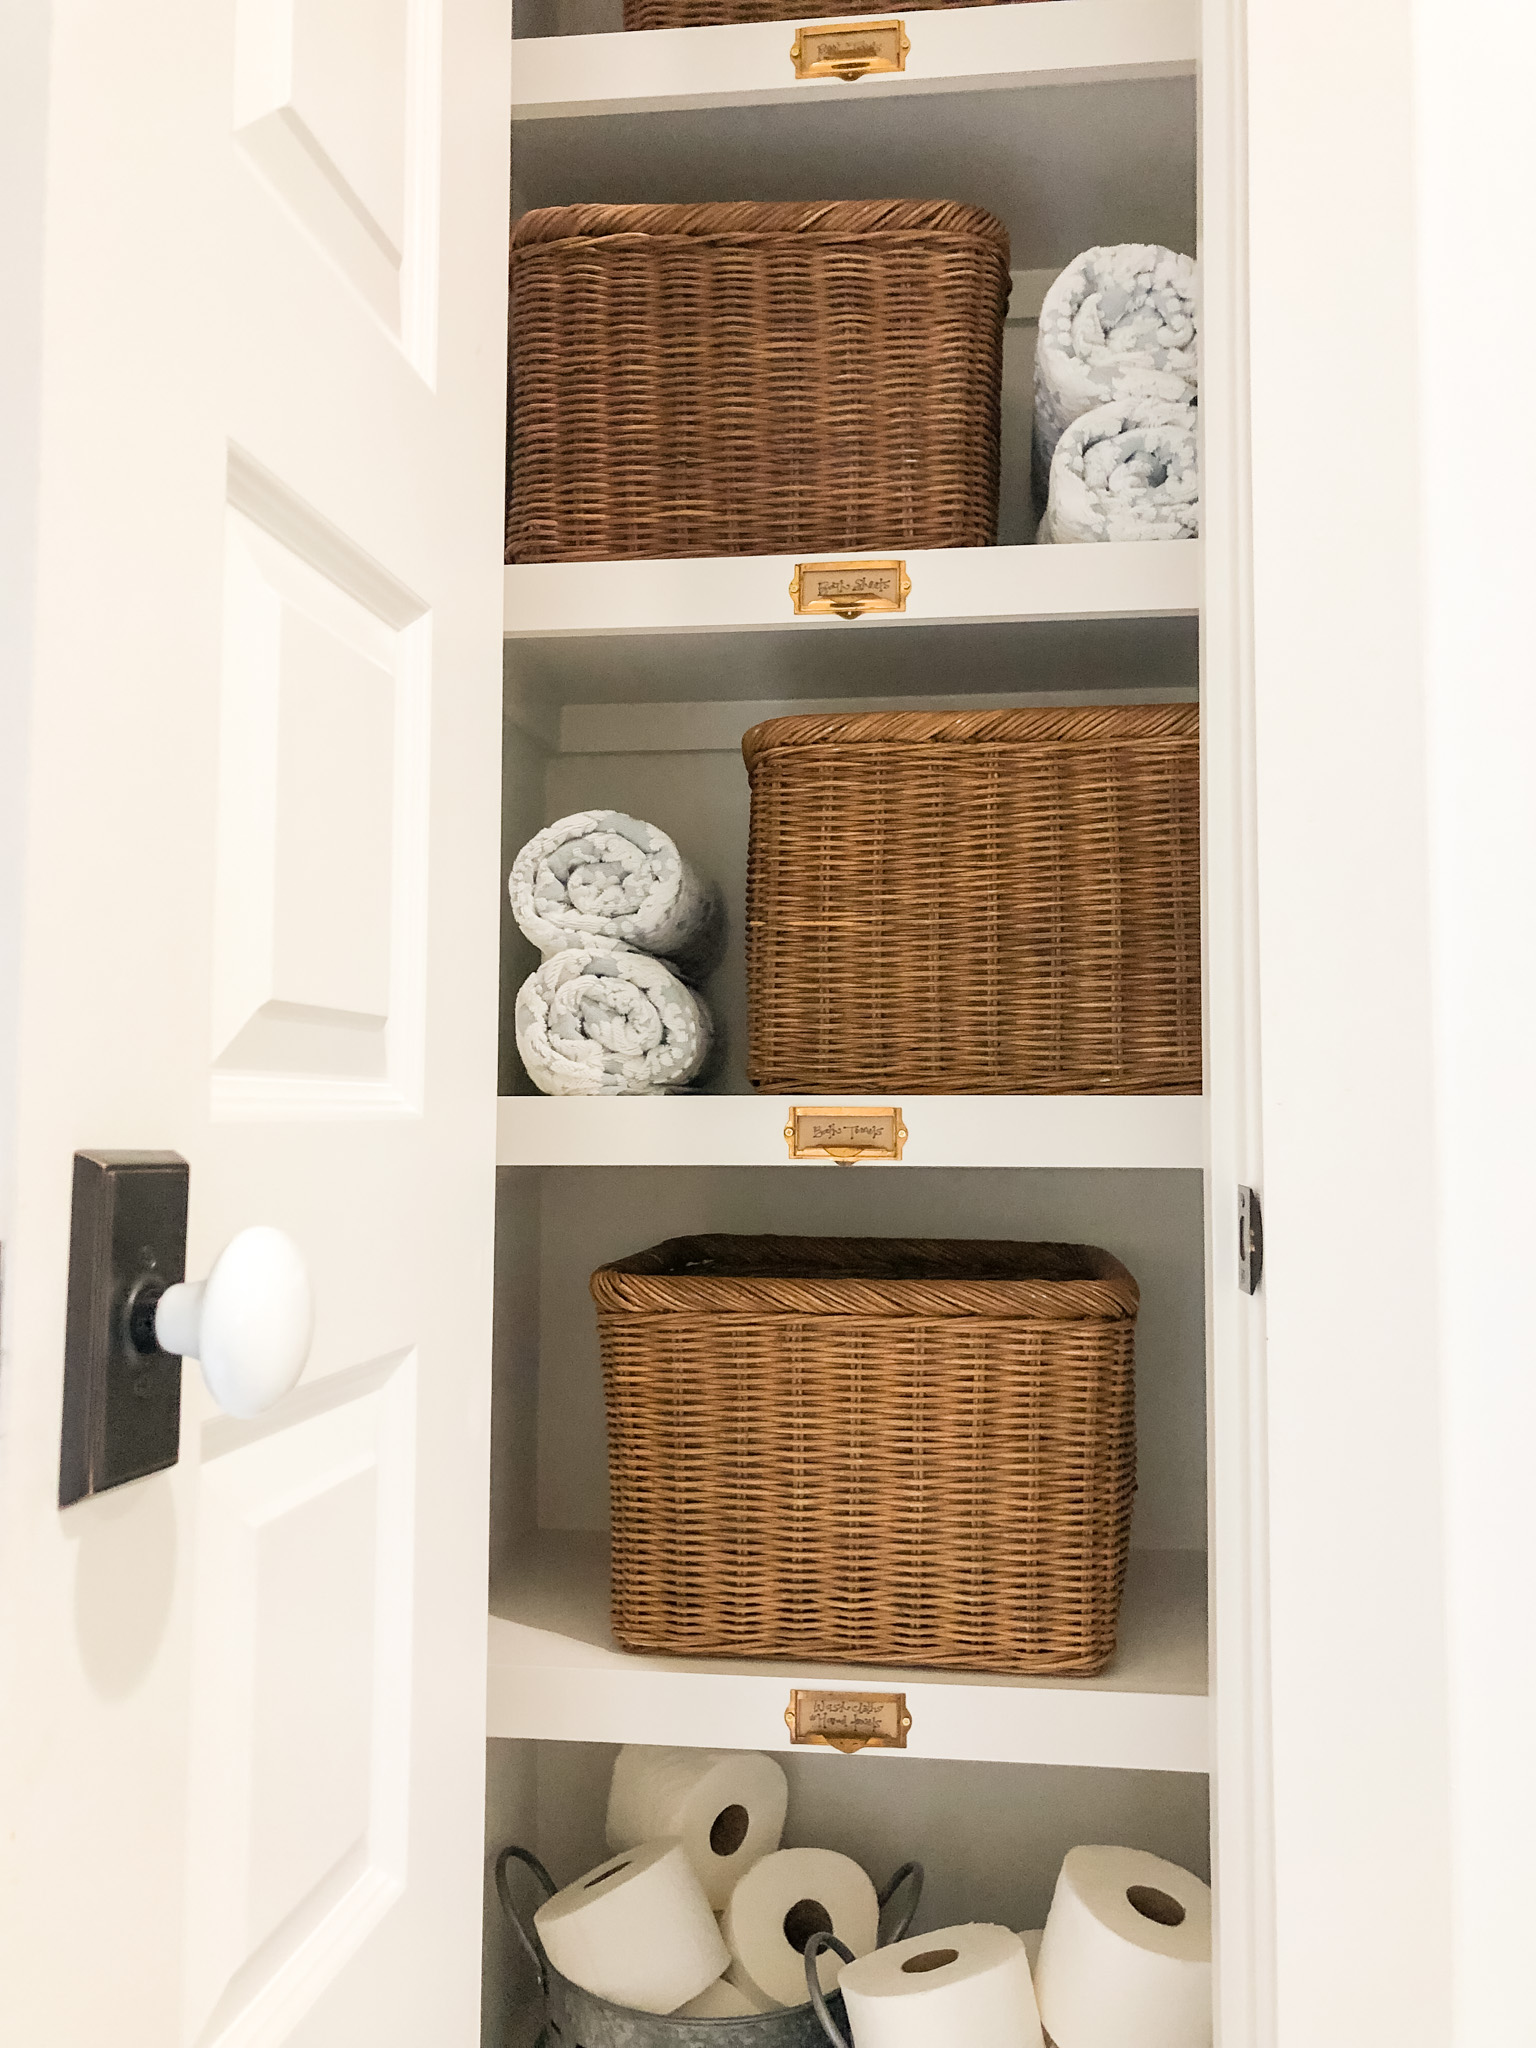 Rattan Baskets and Card Catalog Labels used to organize a Towel Closet